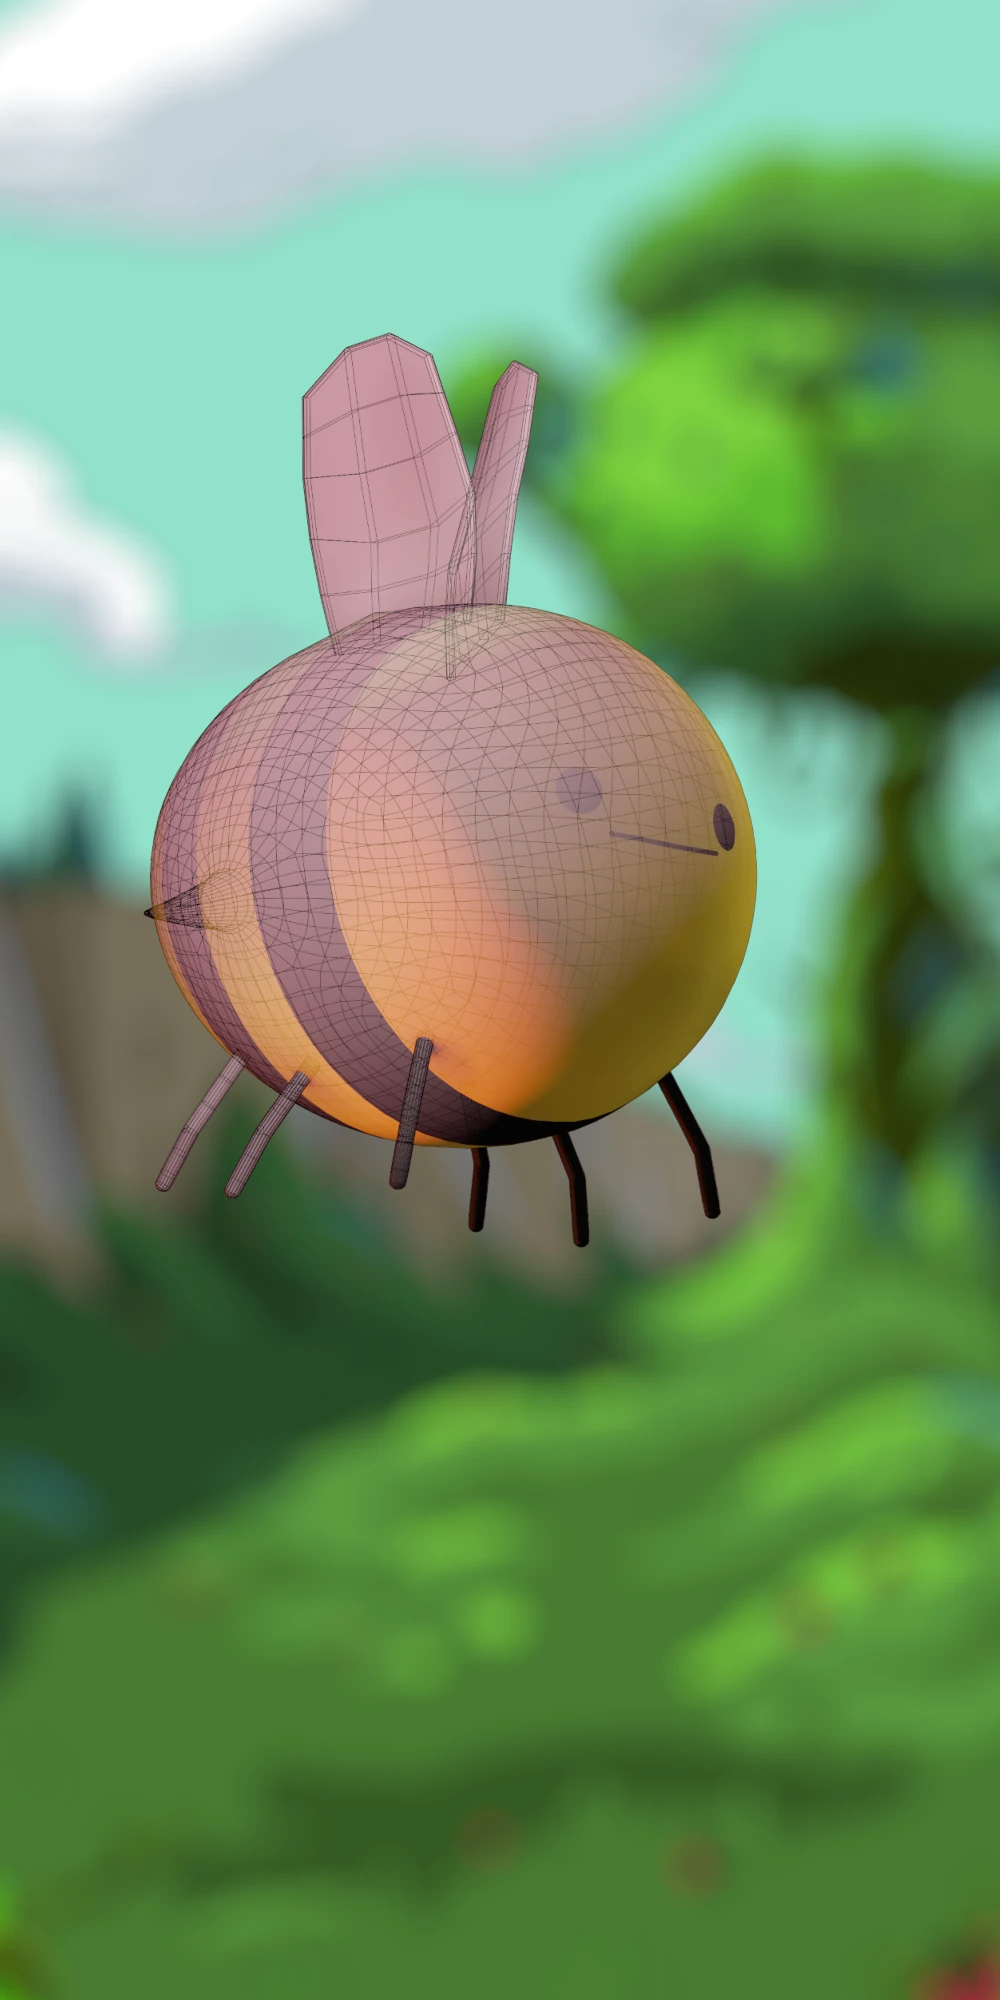 A stylistic bee flying